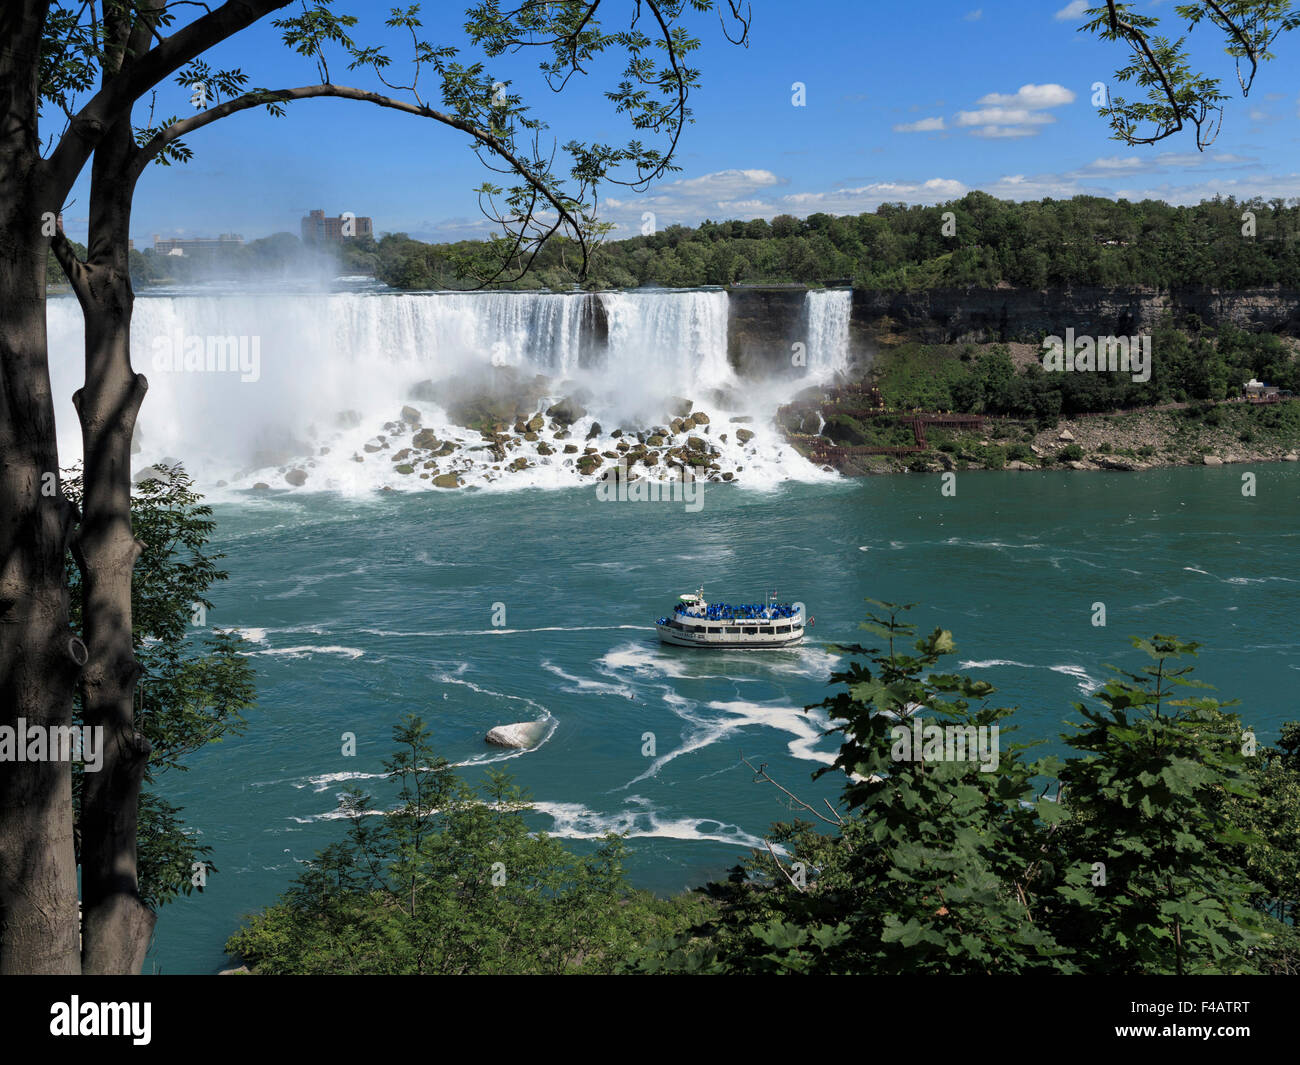 American Falls and Maid of the Mist tour boat framed by a tree on the Canada side of the river Niagara Stock Photo